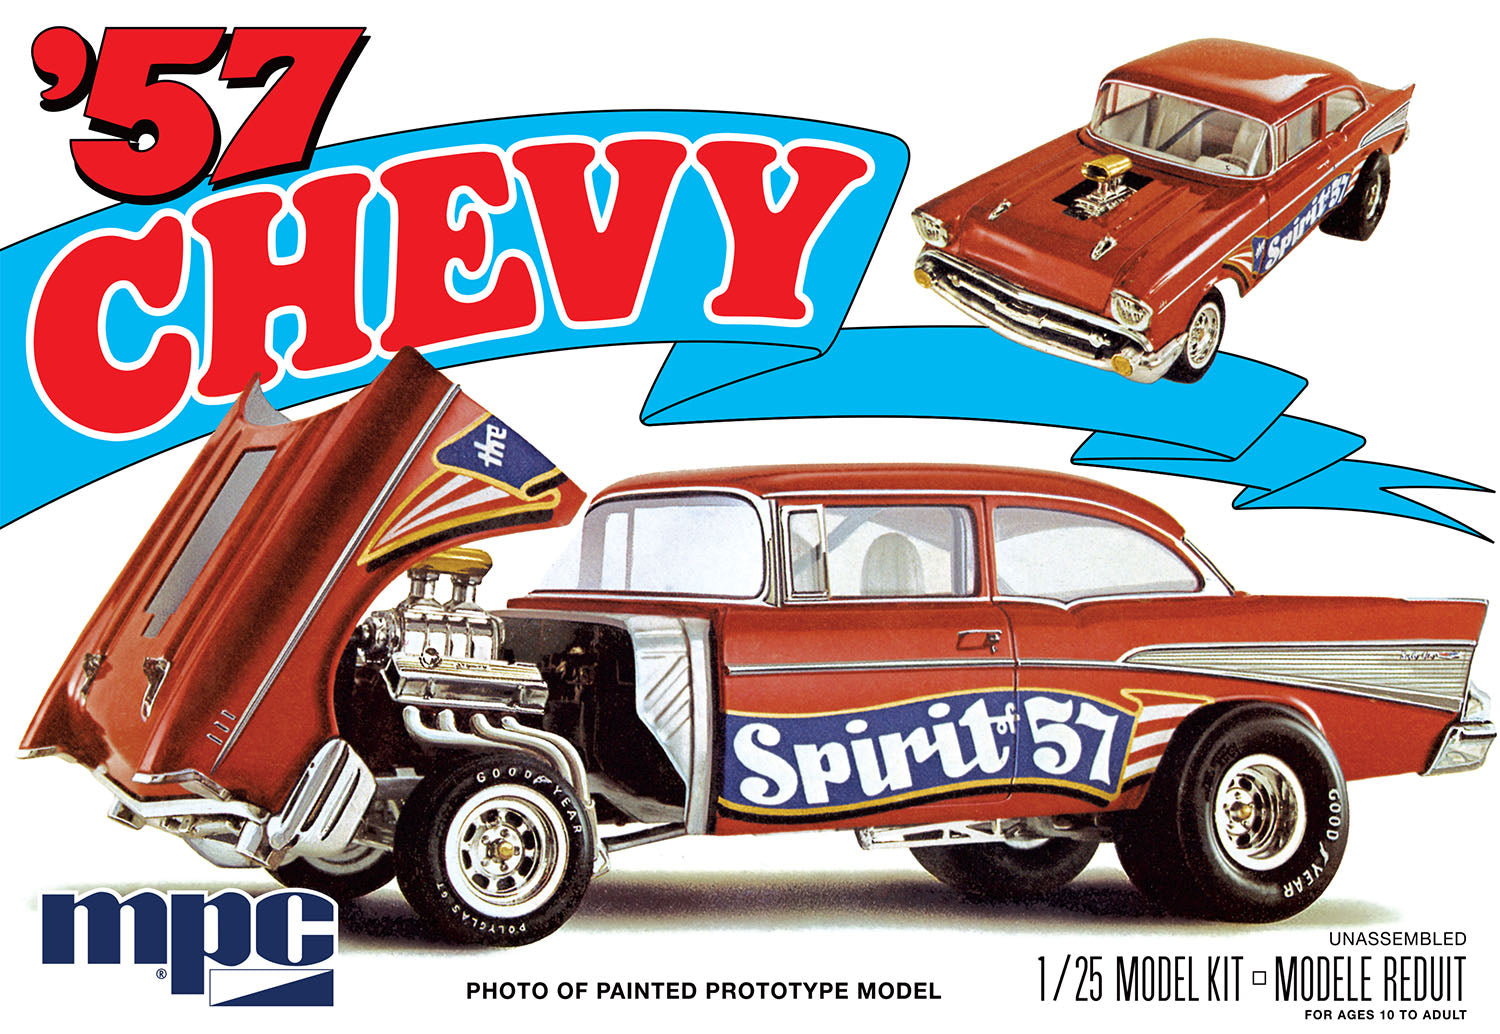 MPC 904 1957 Chevy Bel Air “Spirit of 57” 1/25 Scale Model Kit